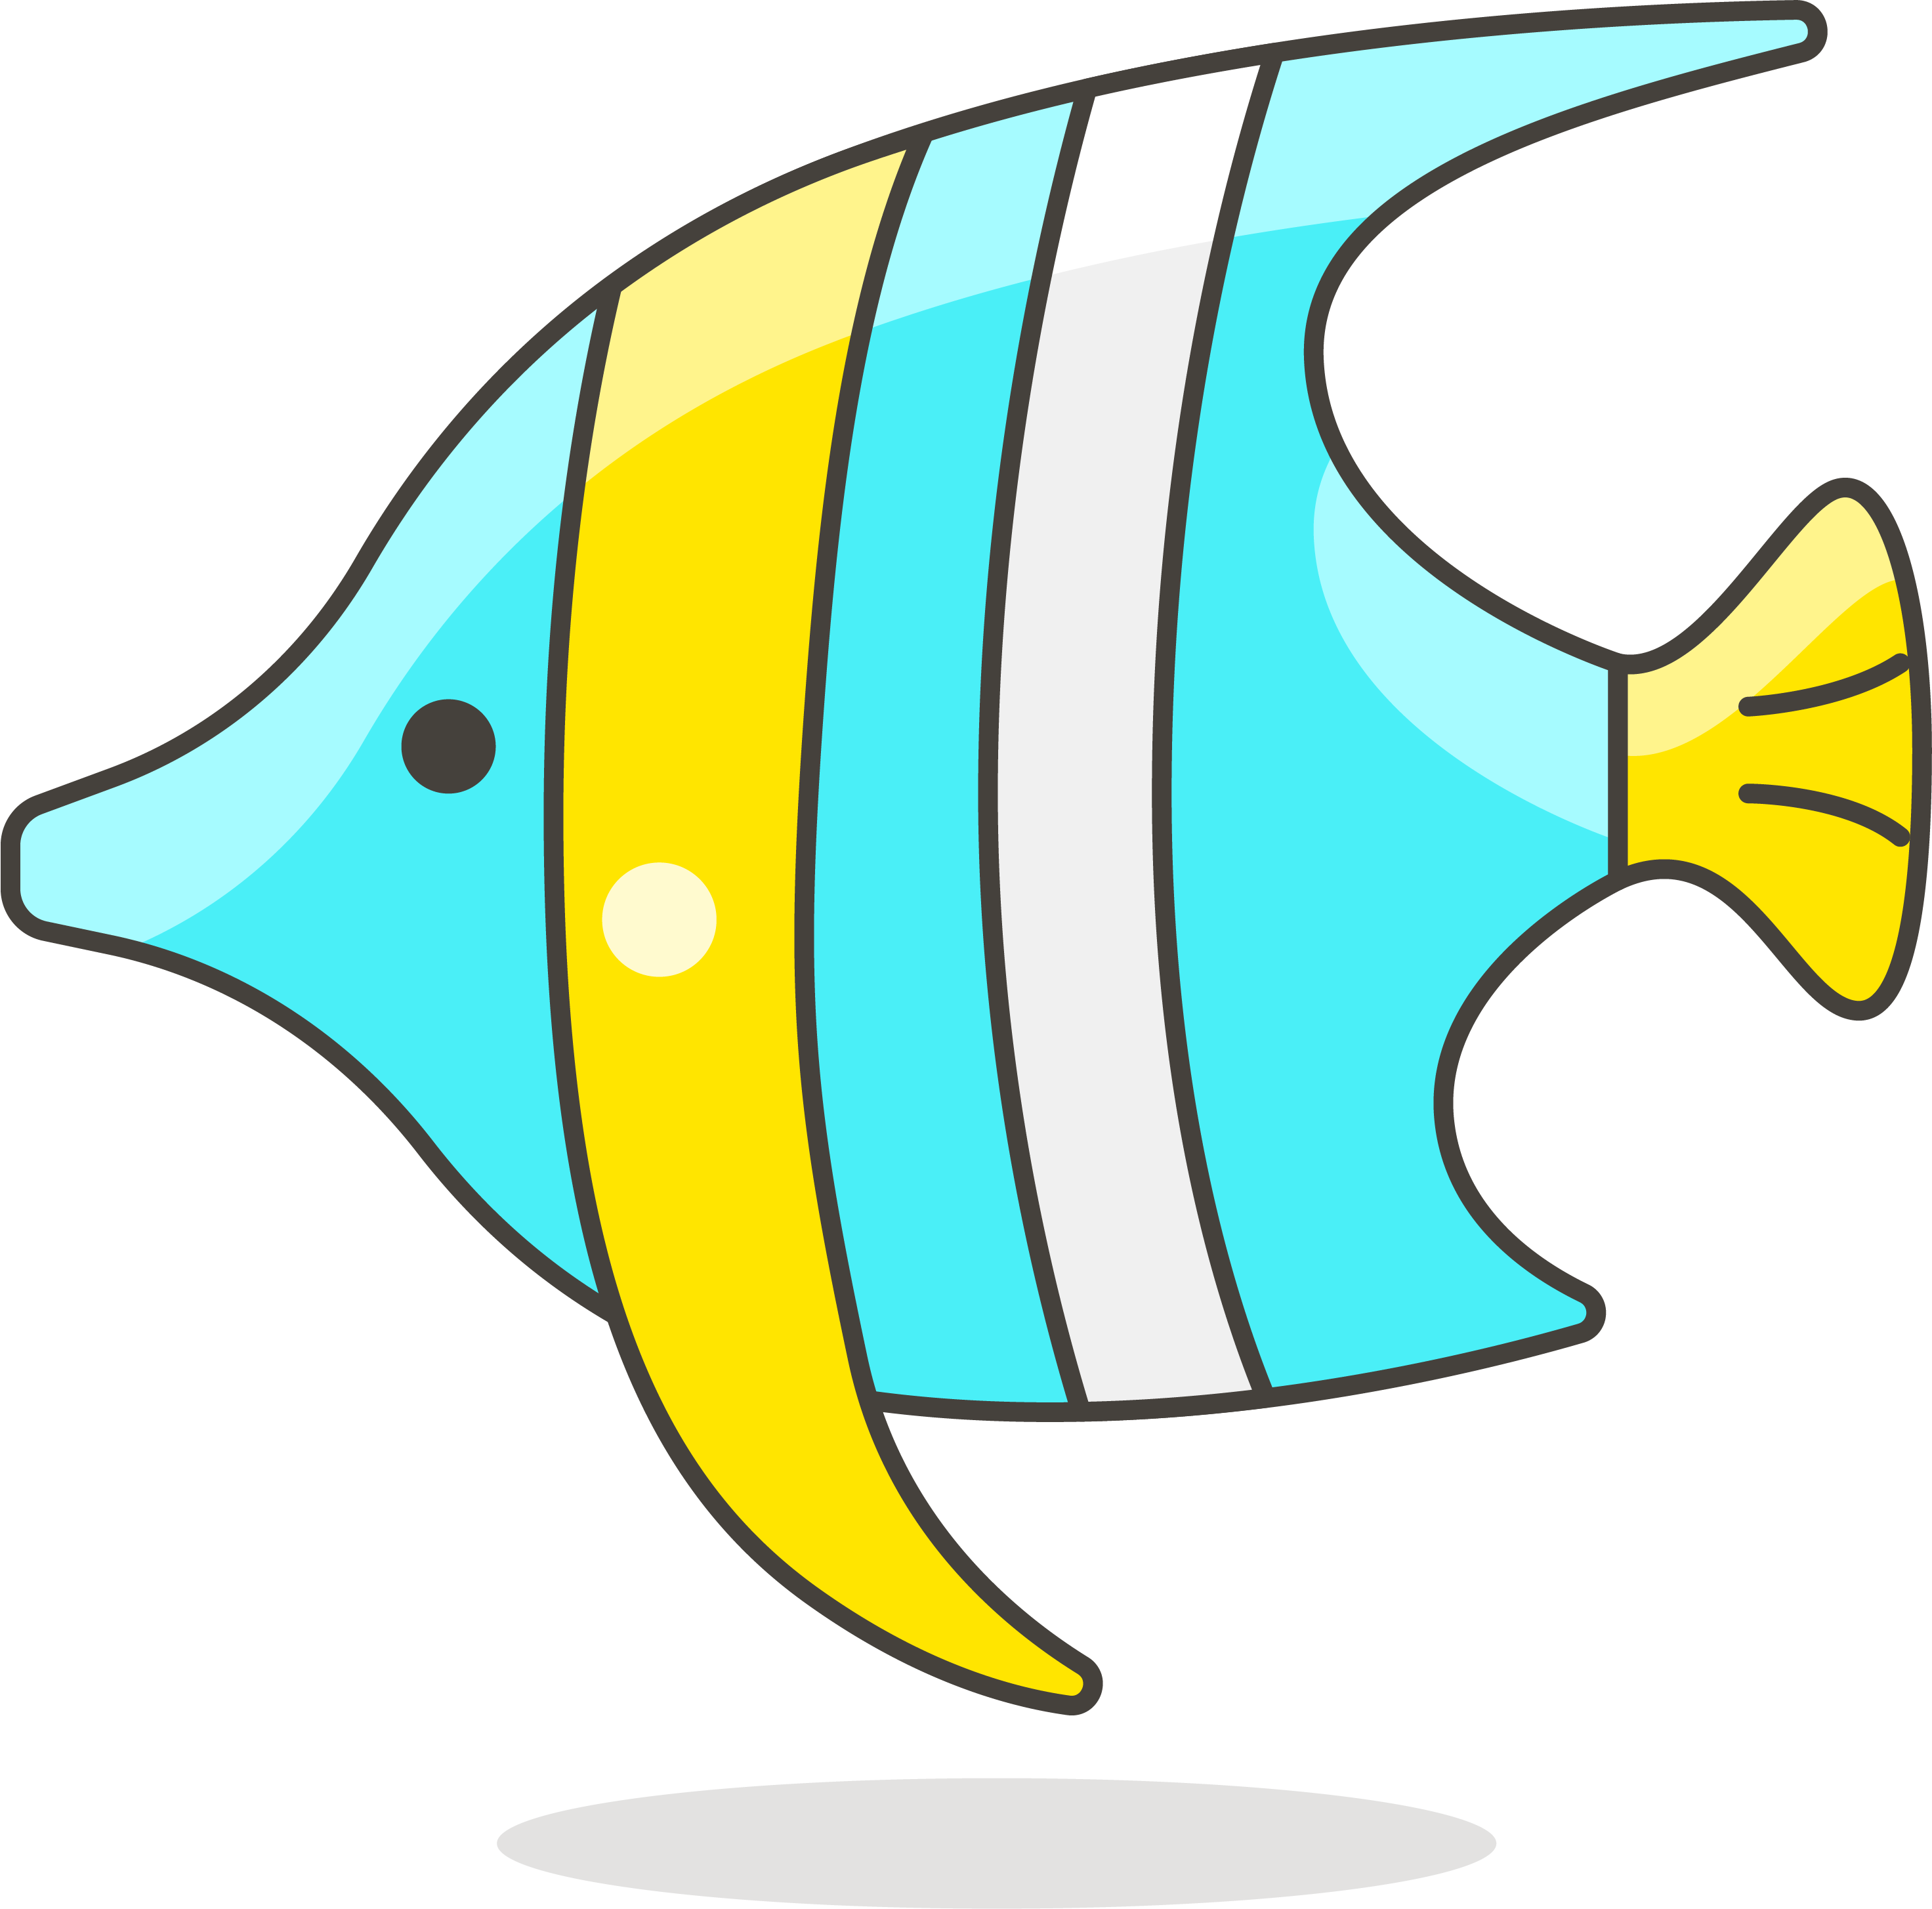 Fish Clip Art Simple Lovely - Peces Tropicales Animados Dibujo (2944x2909)